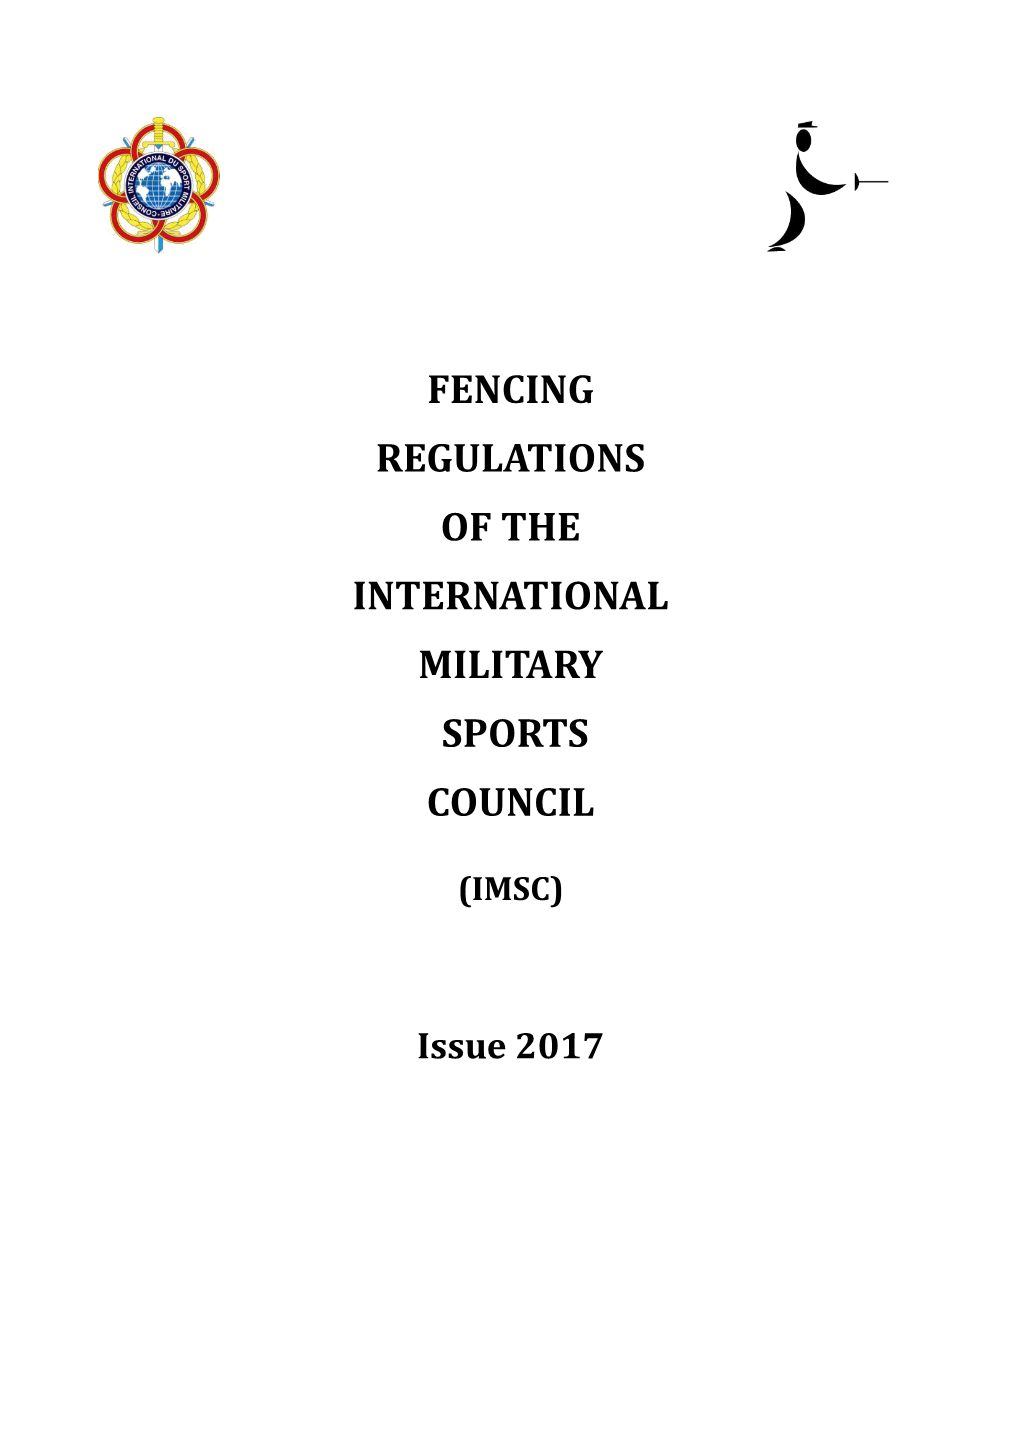 Fencing Regulations of the International Military Sports Council